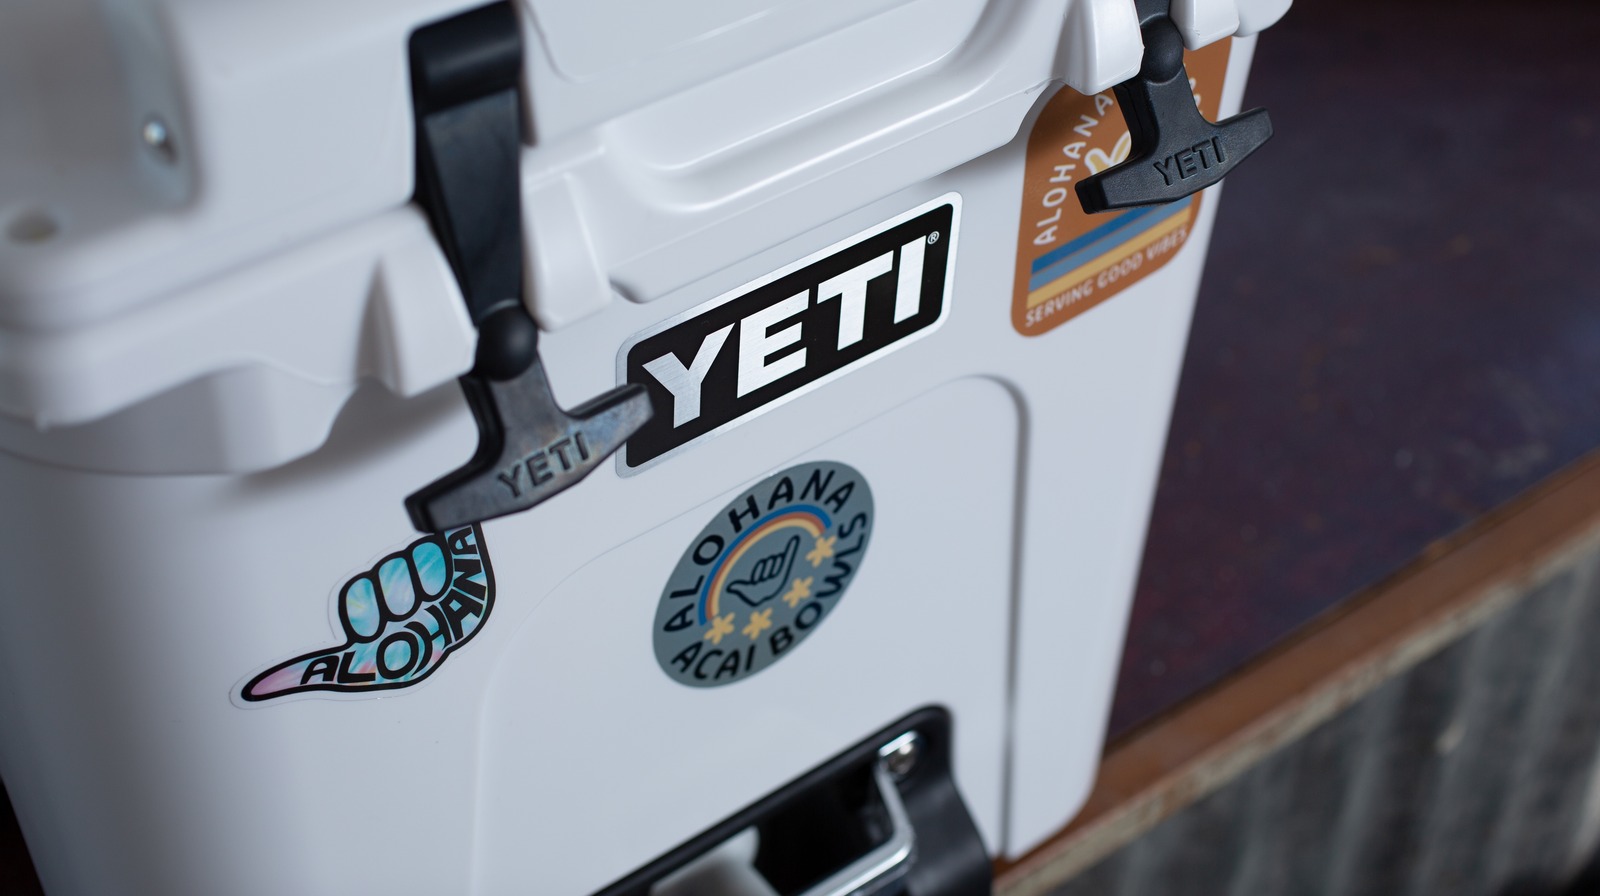 https://www.thedailymeal.com/img/gallery/yeti-is-recalling-millions-of-coolers-and-gear-cases-heres-what-you-should-know/l-intro-1678468735.jpg